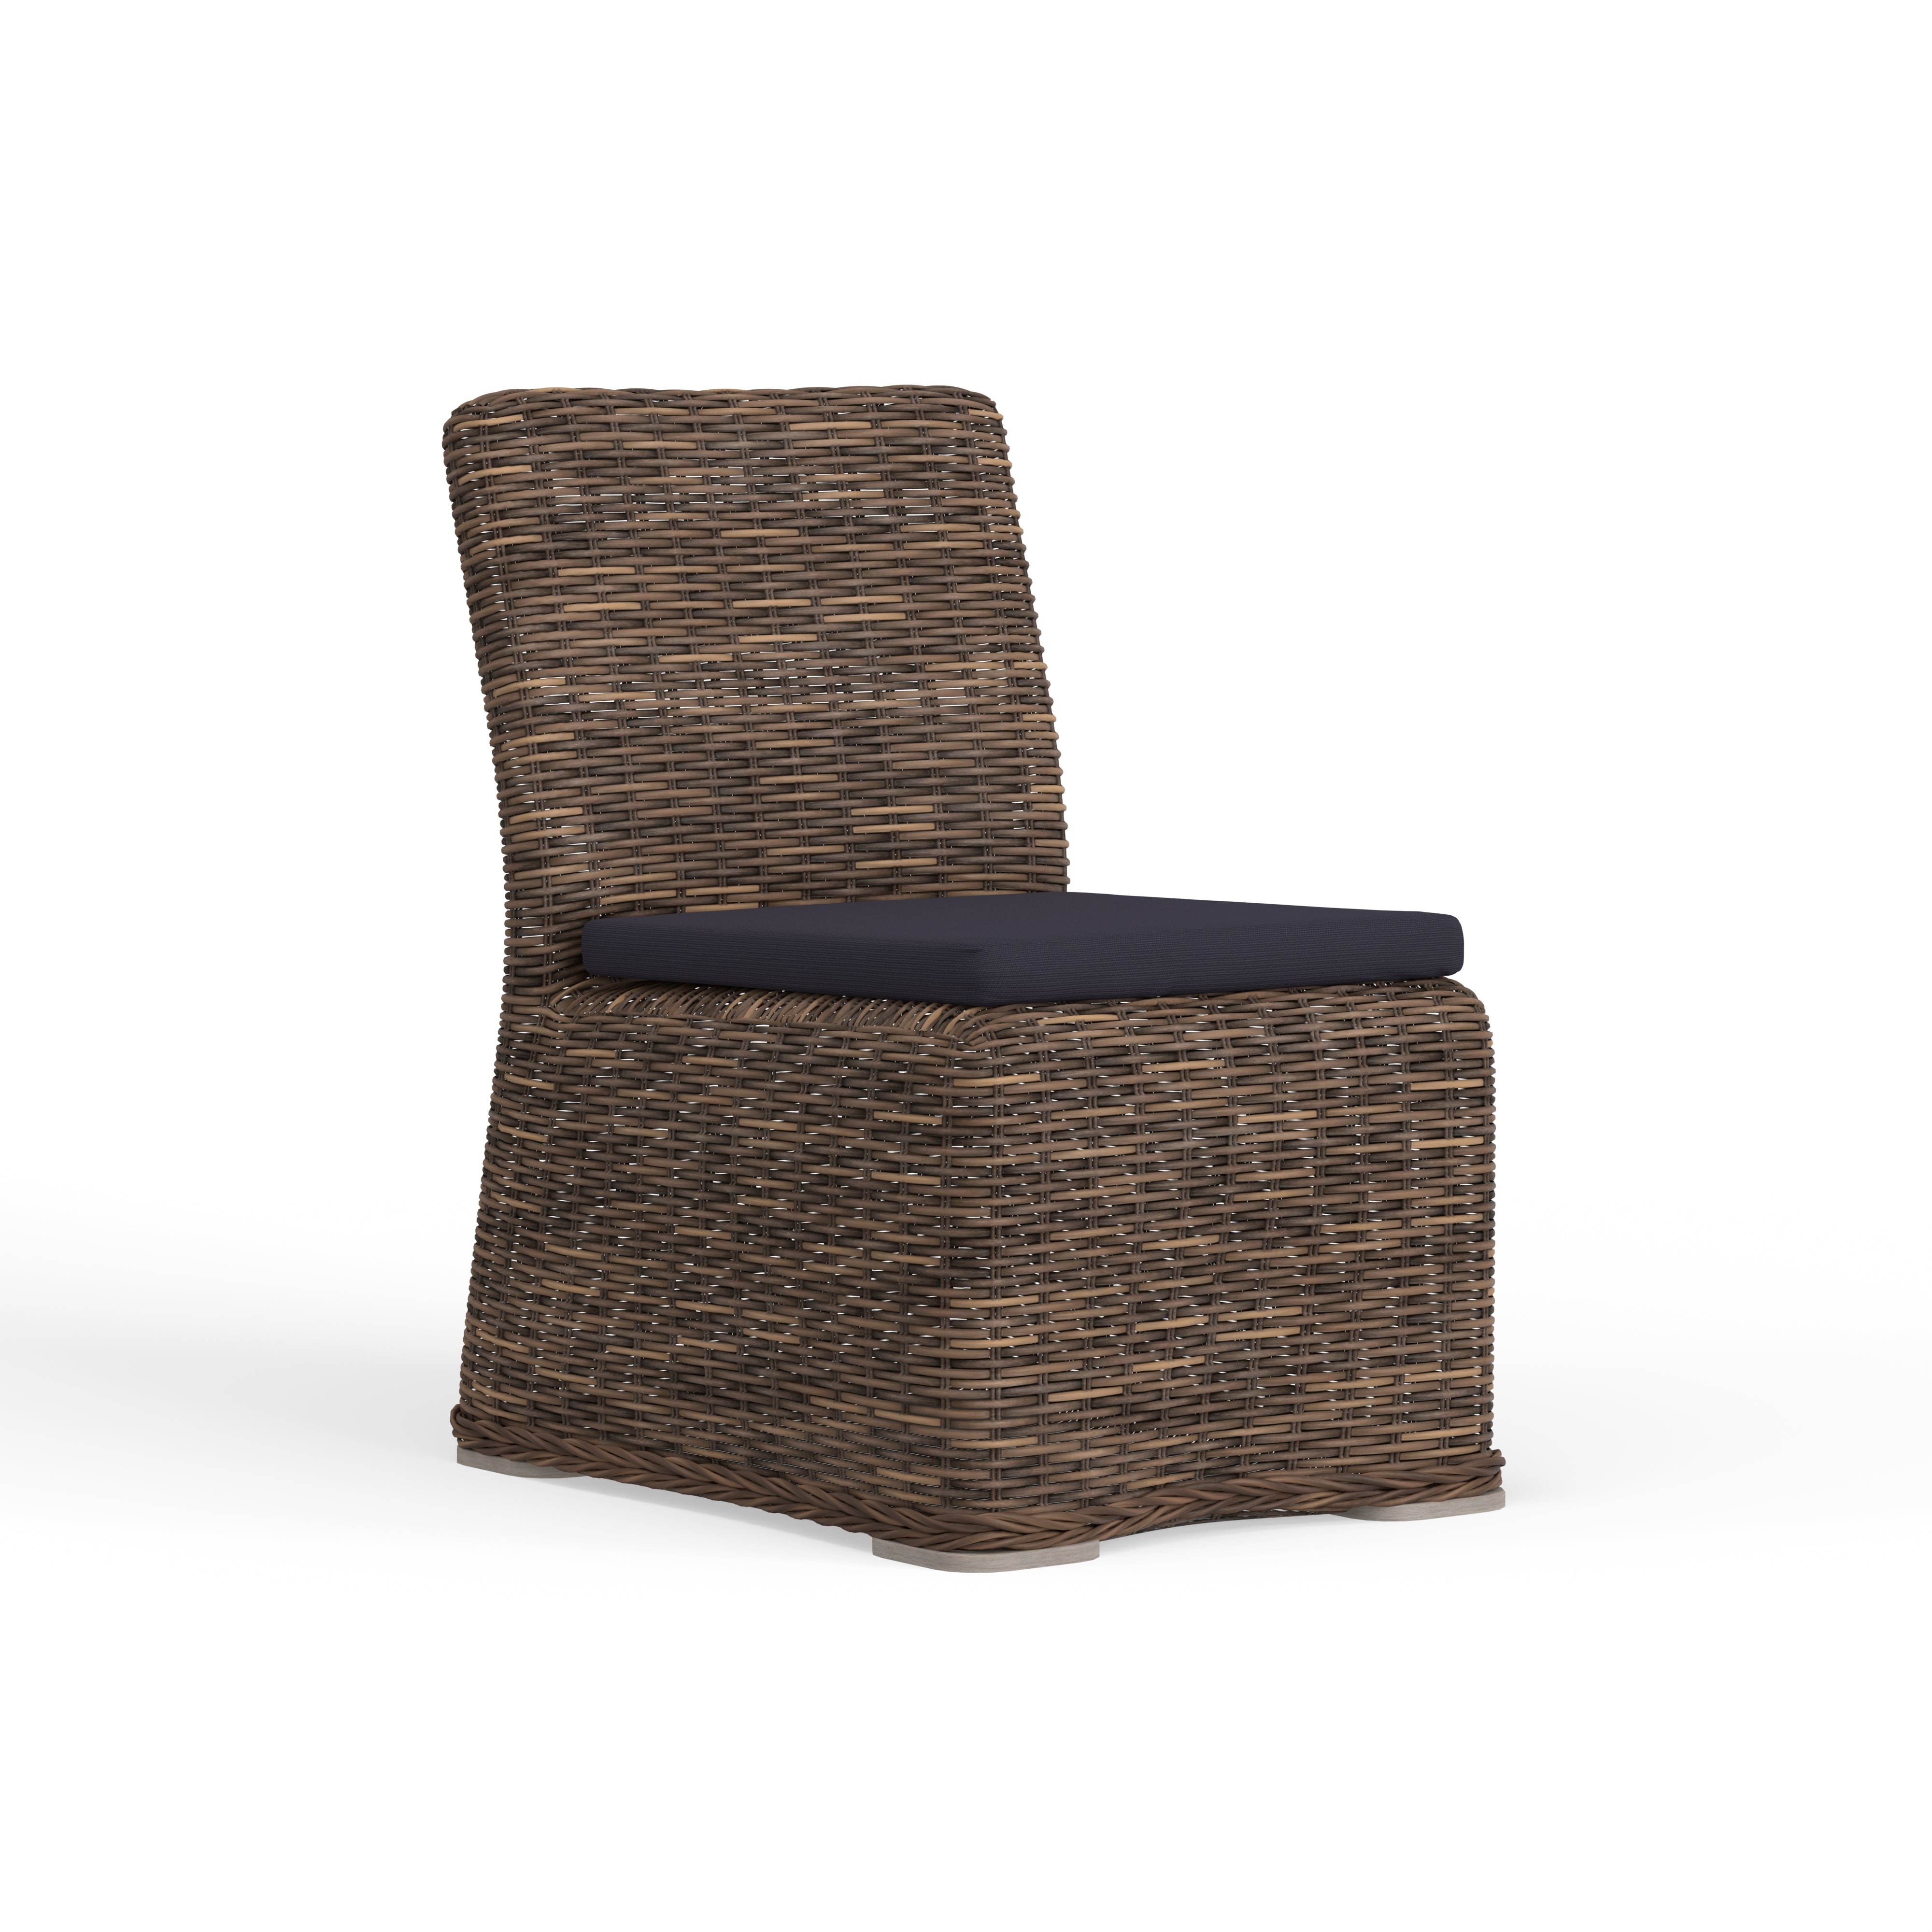 Handwoven Quality Wicker Dining Side Chair